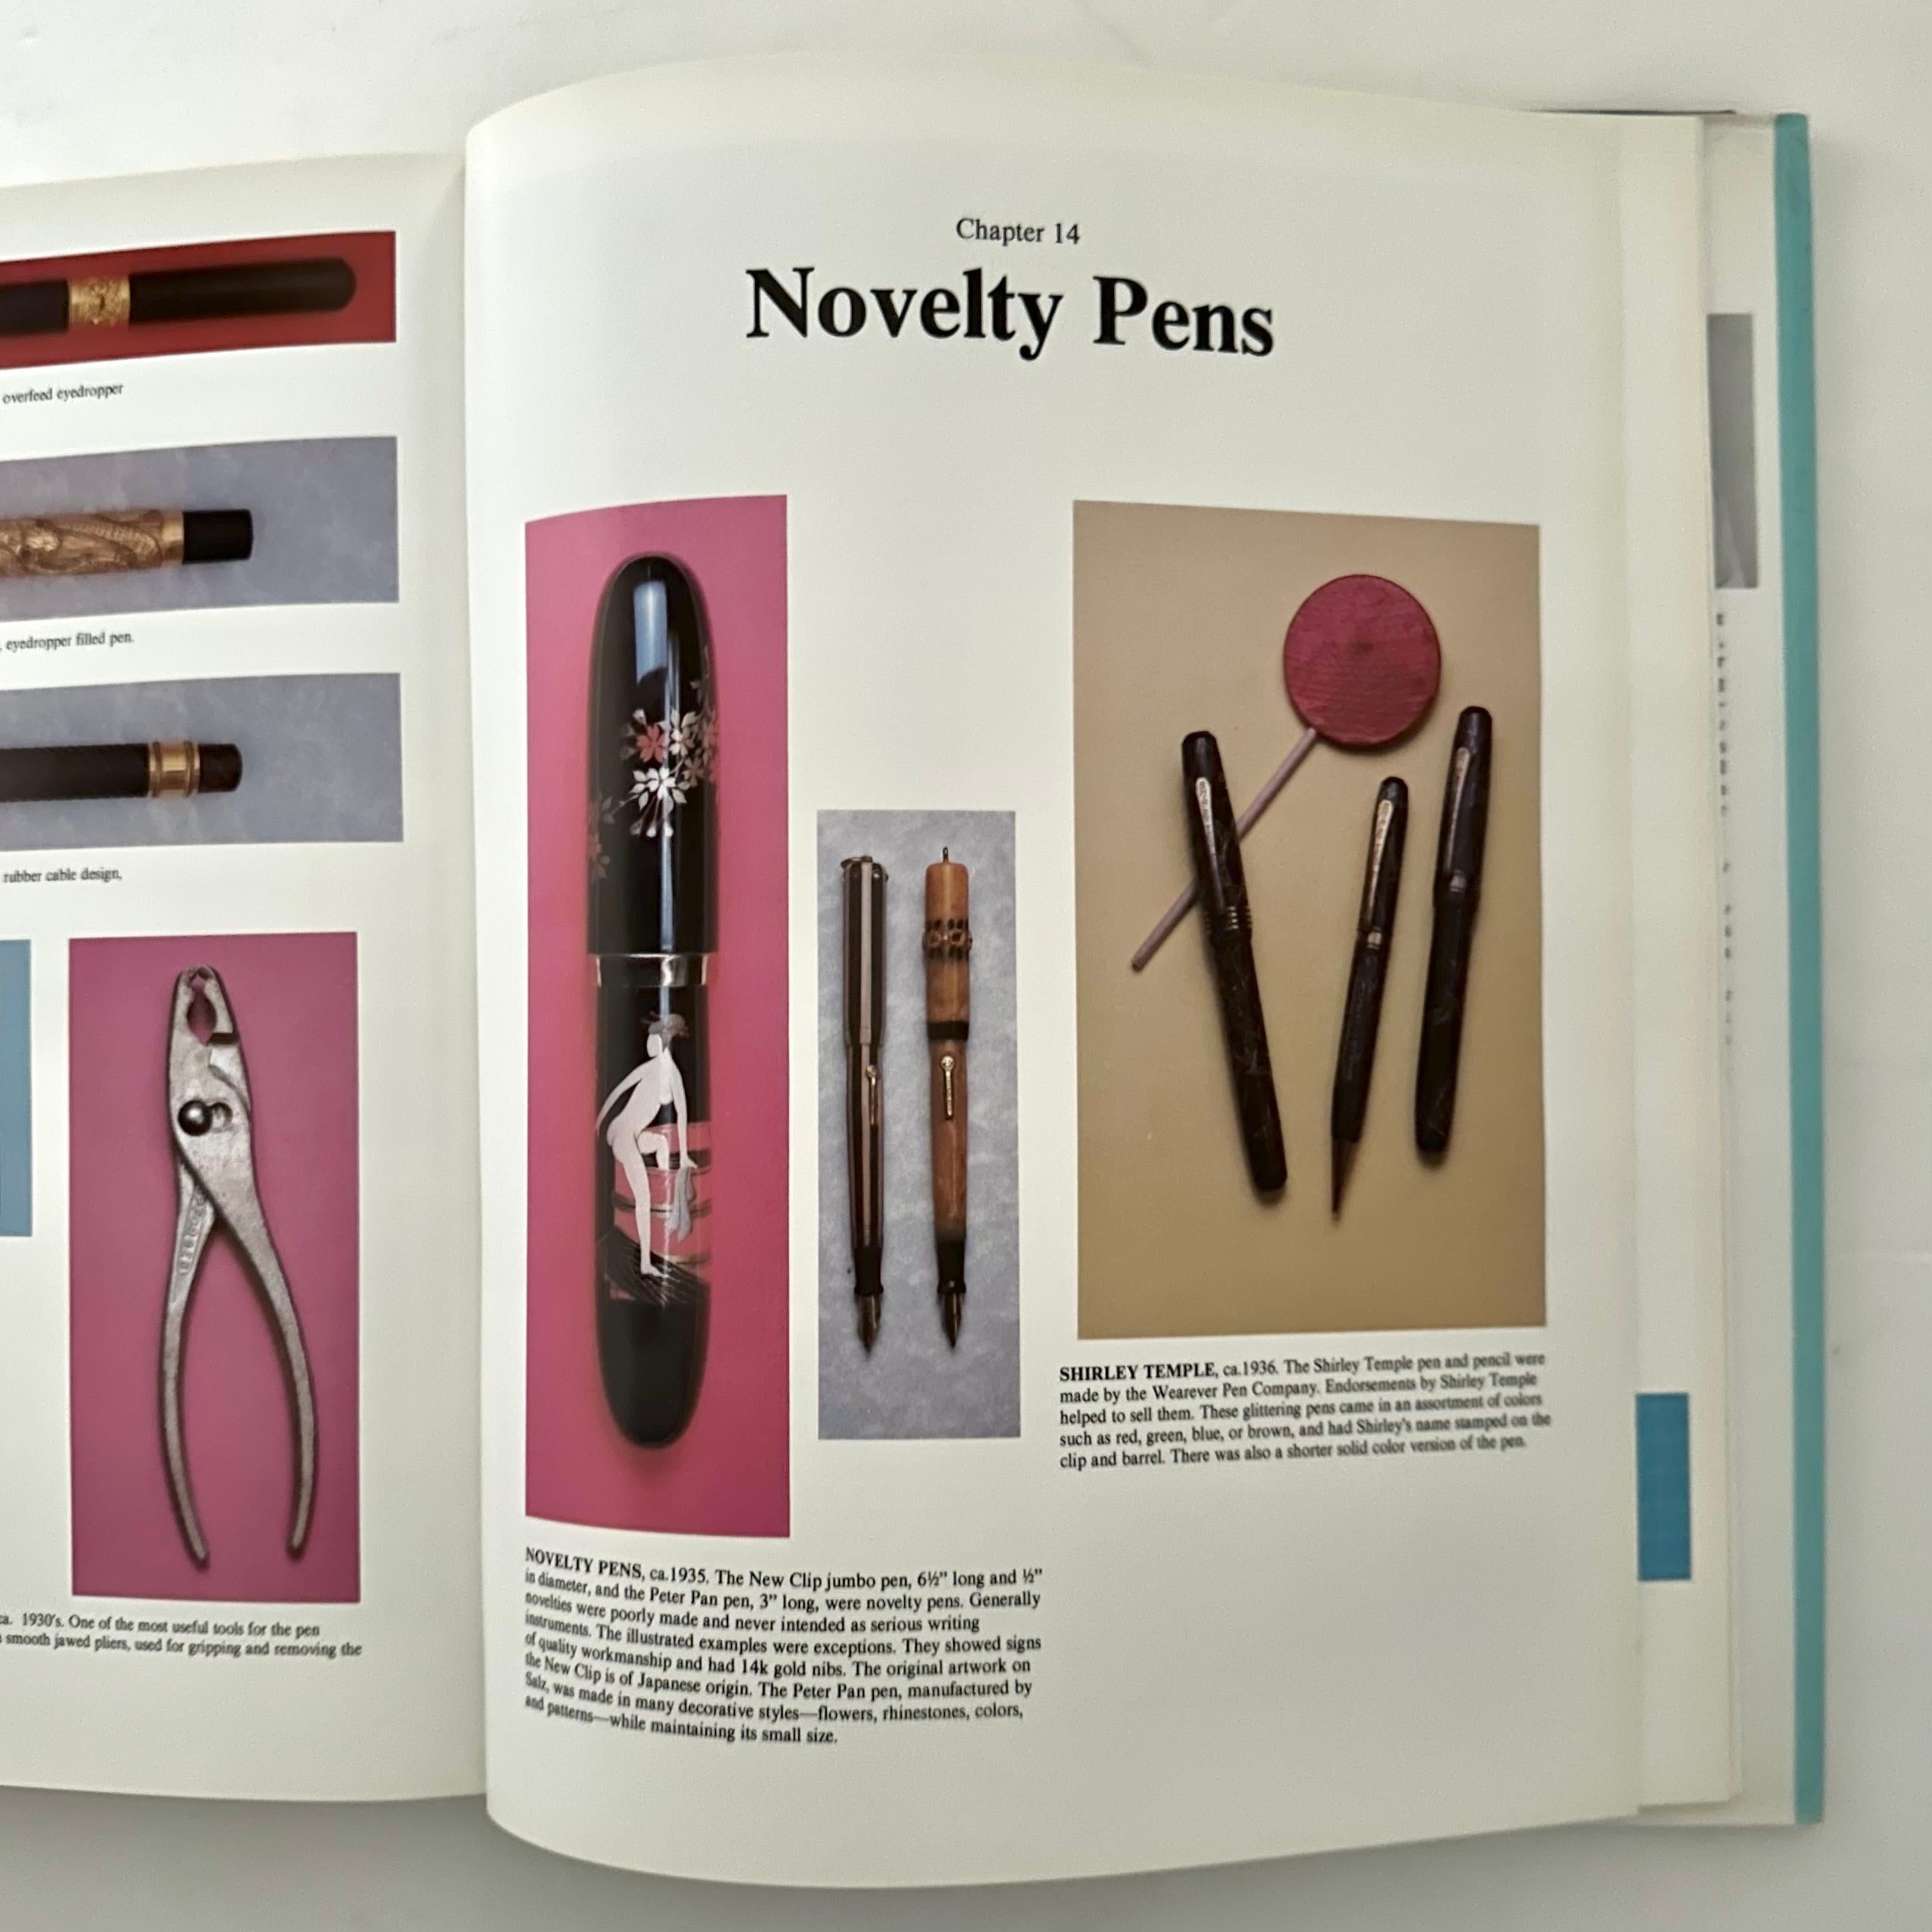 Published by Schiffer Publishing, Ltd., 1st edition, 1990. Hardback with English text.

Profusely illustrated with over a thousand fountain pens with full or nearly full-sized coloured photographs. This book chronicles the history of the fountain